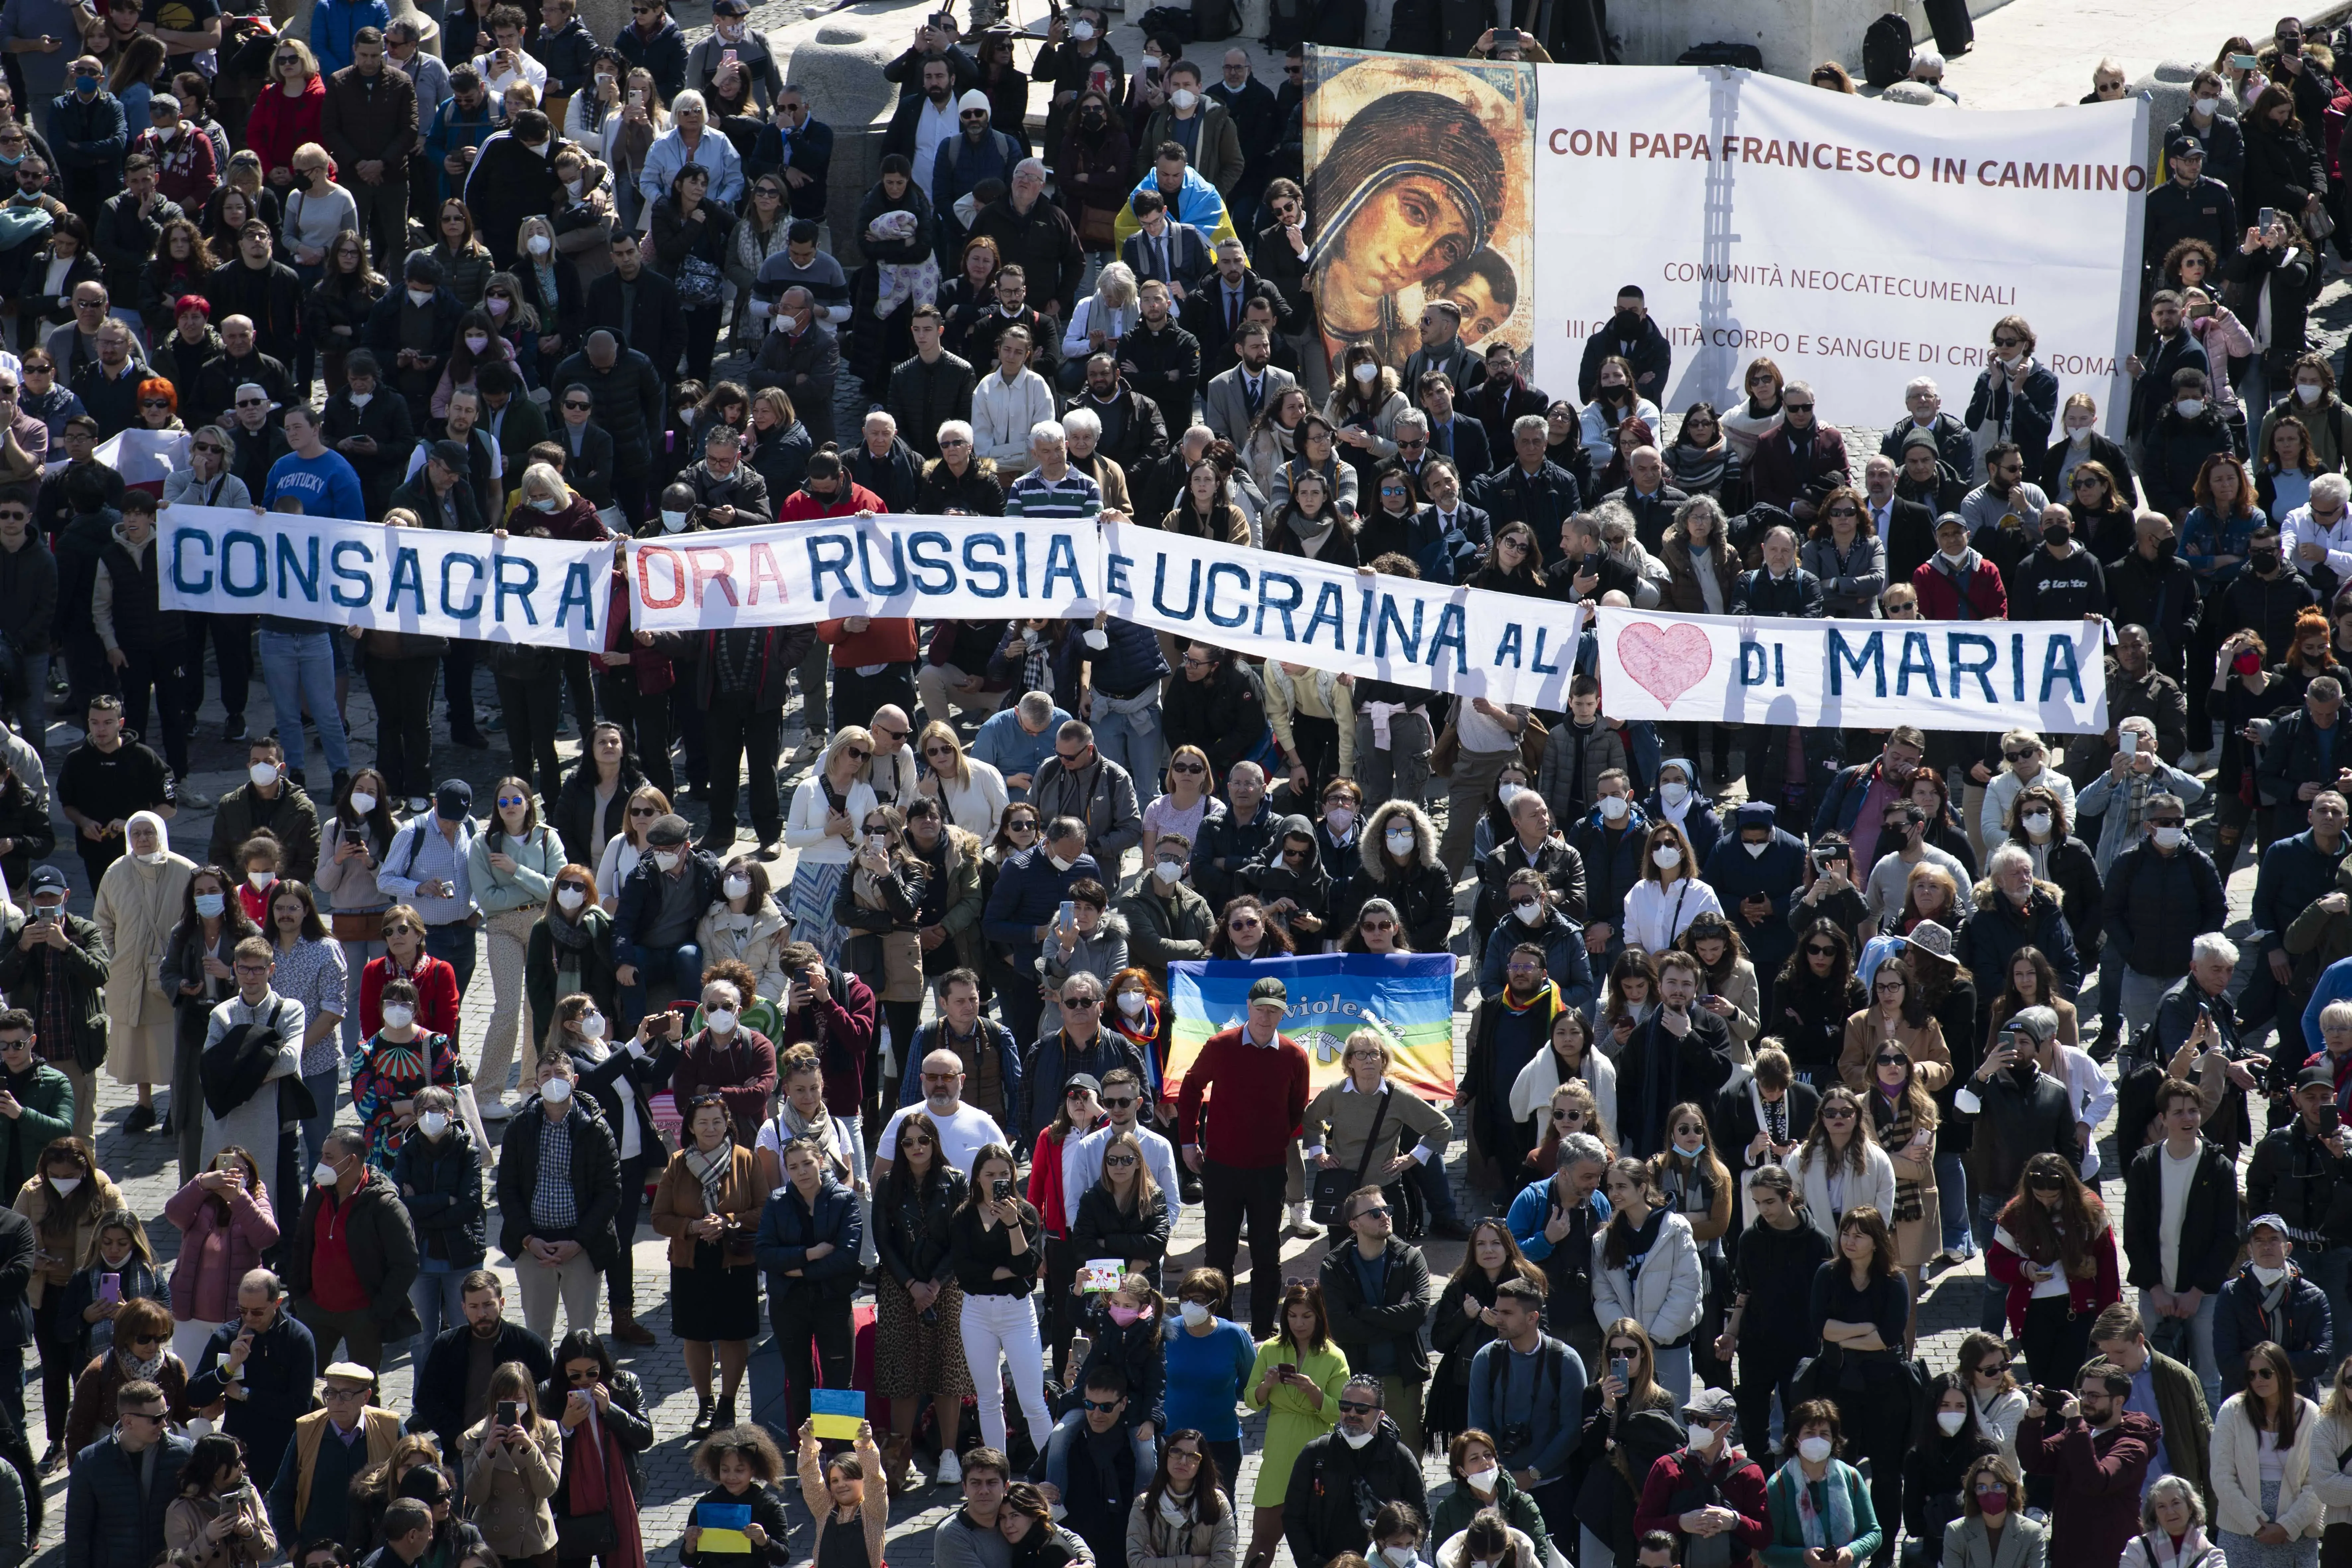 Banner calling for the consecration of Russia is displayed during Pope Francis' Angelus in St. Peter's Square on March 13, 2022. Vatican Media